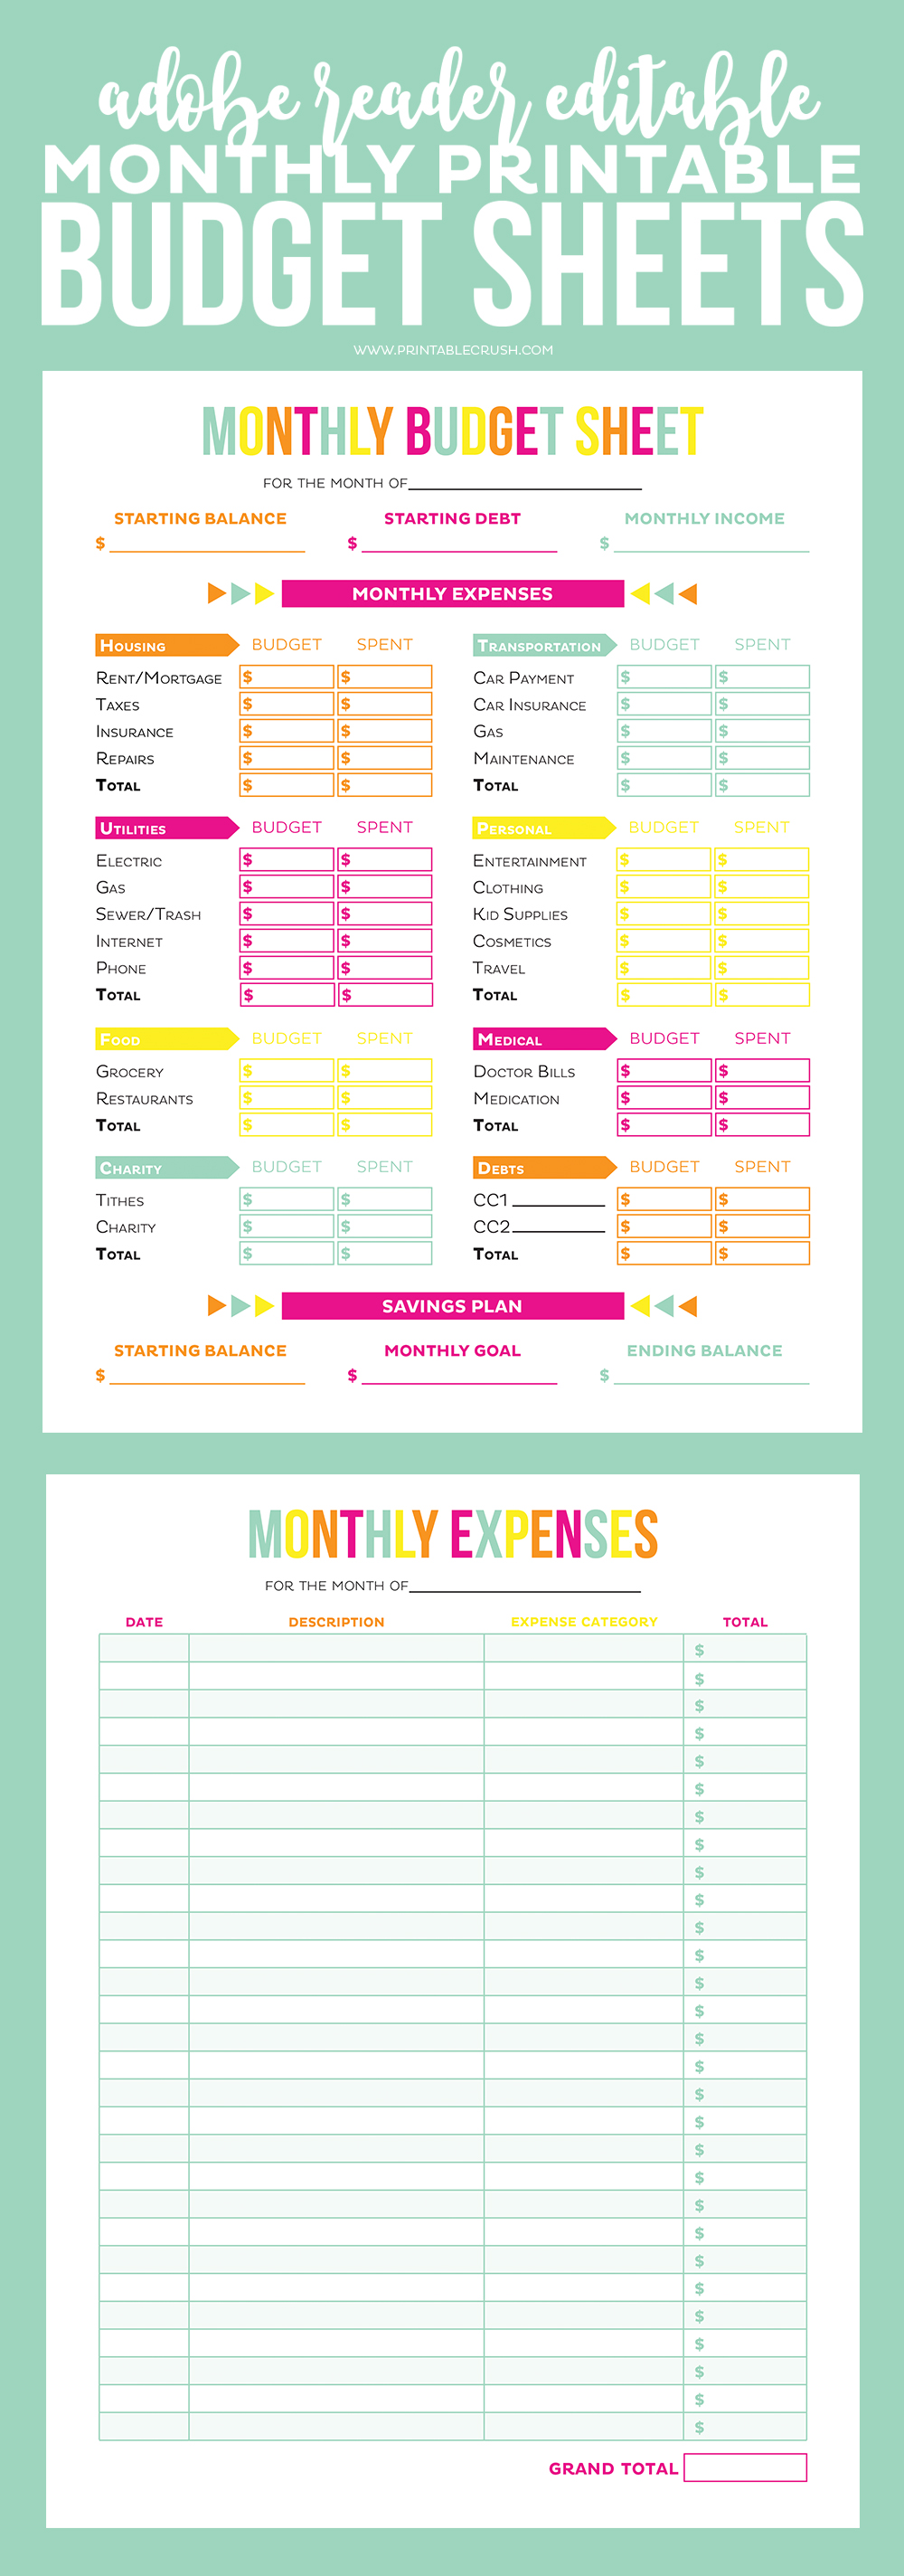 Get your finances in order with these Editable Printable Budget Sheets! Includes monthly budget and expense sheets so you can easily keep track of your money!